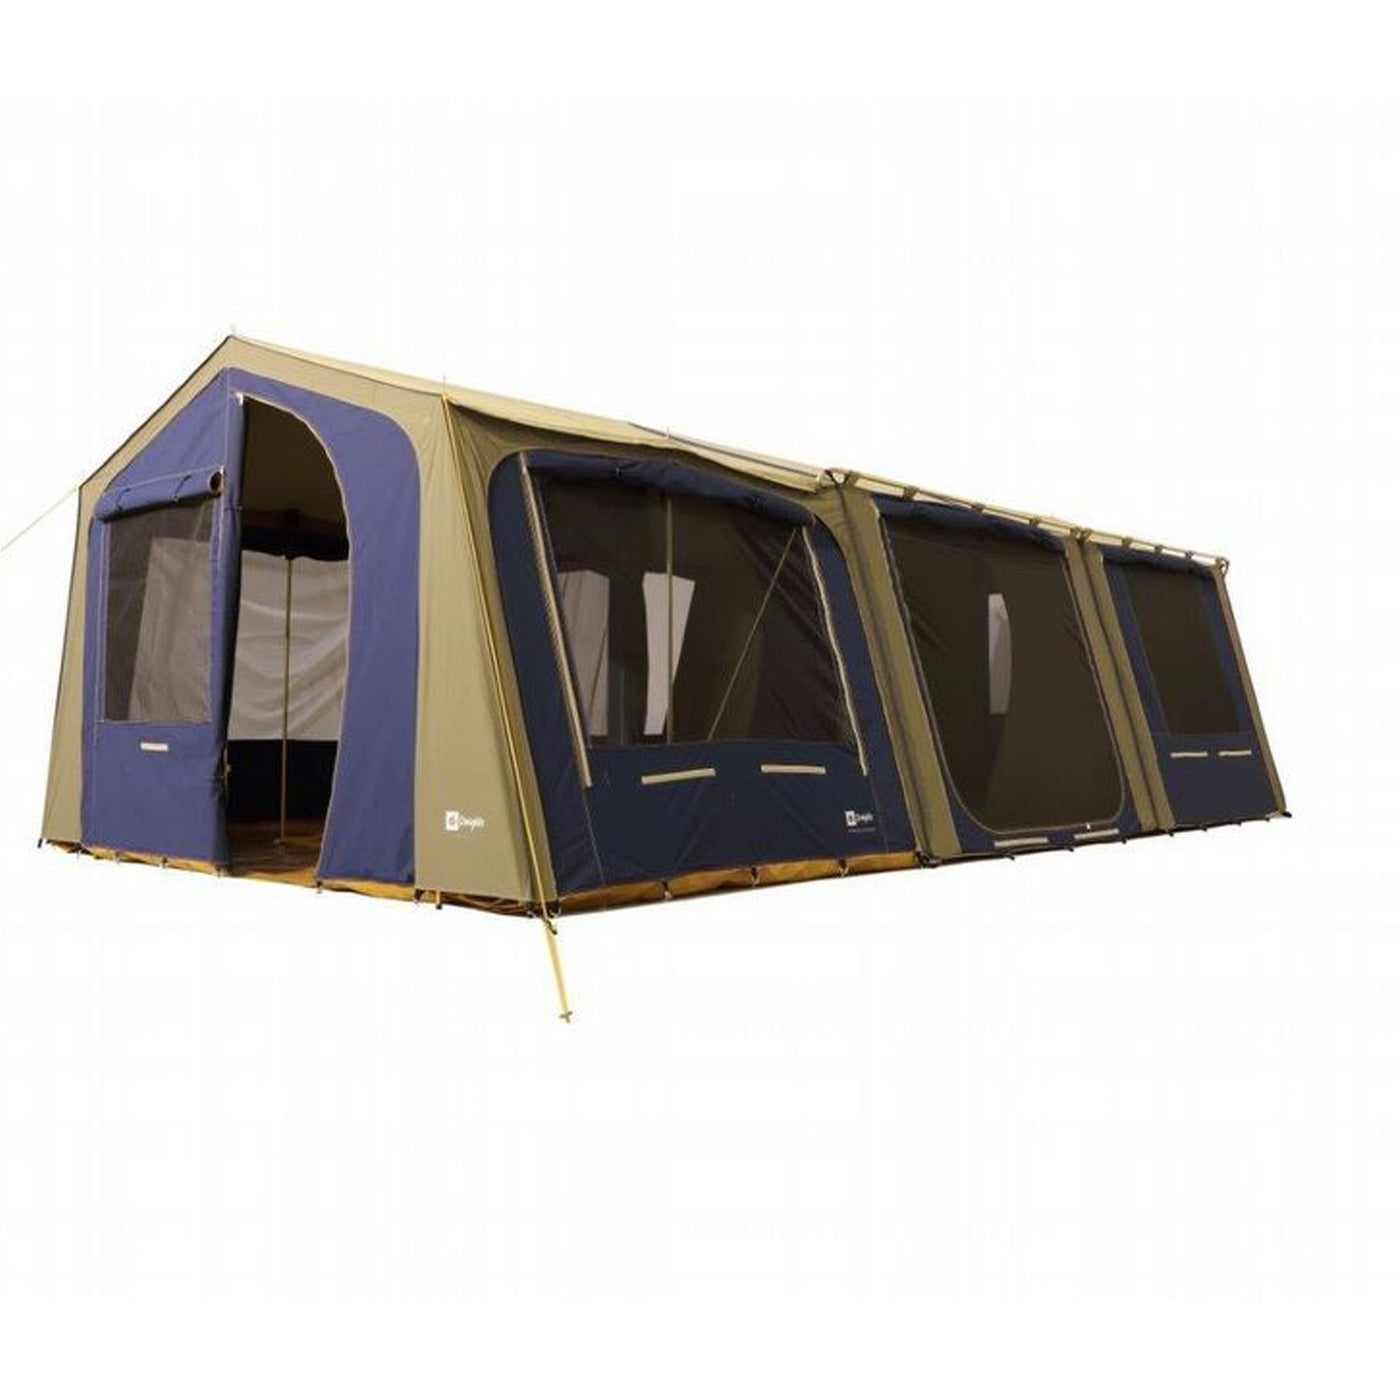 Coastline tent with optional sunroom attached